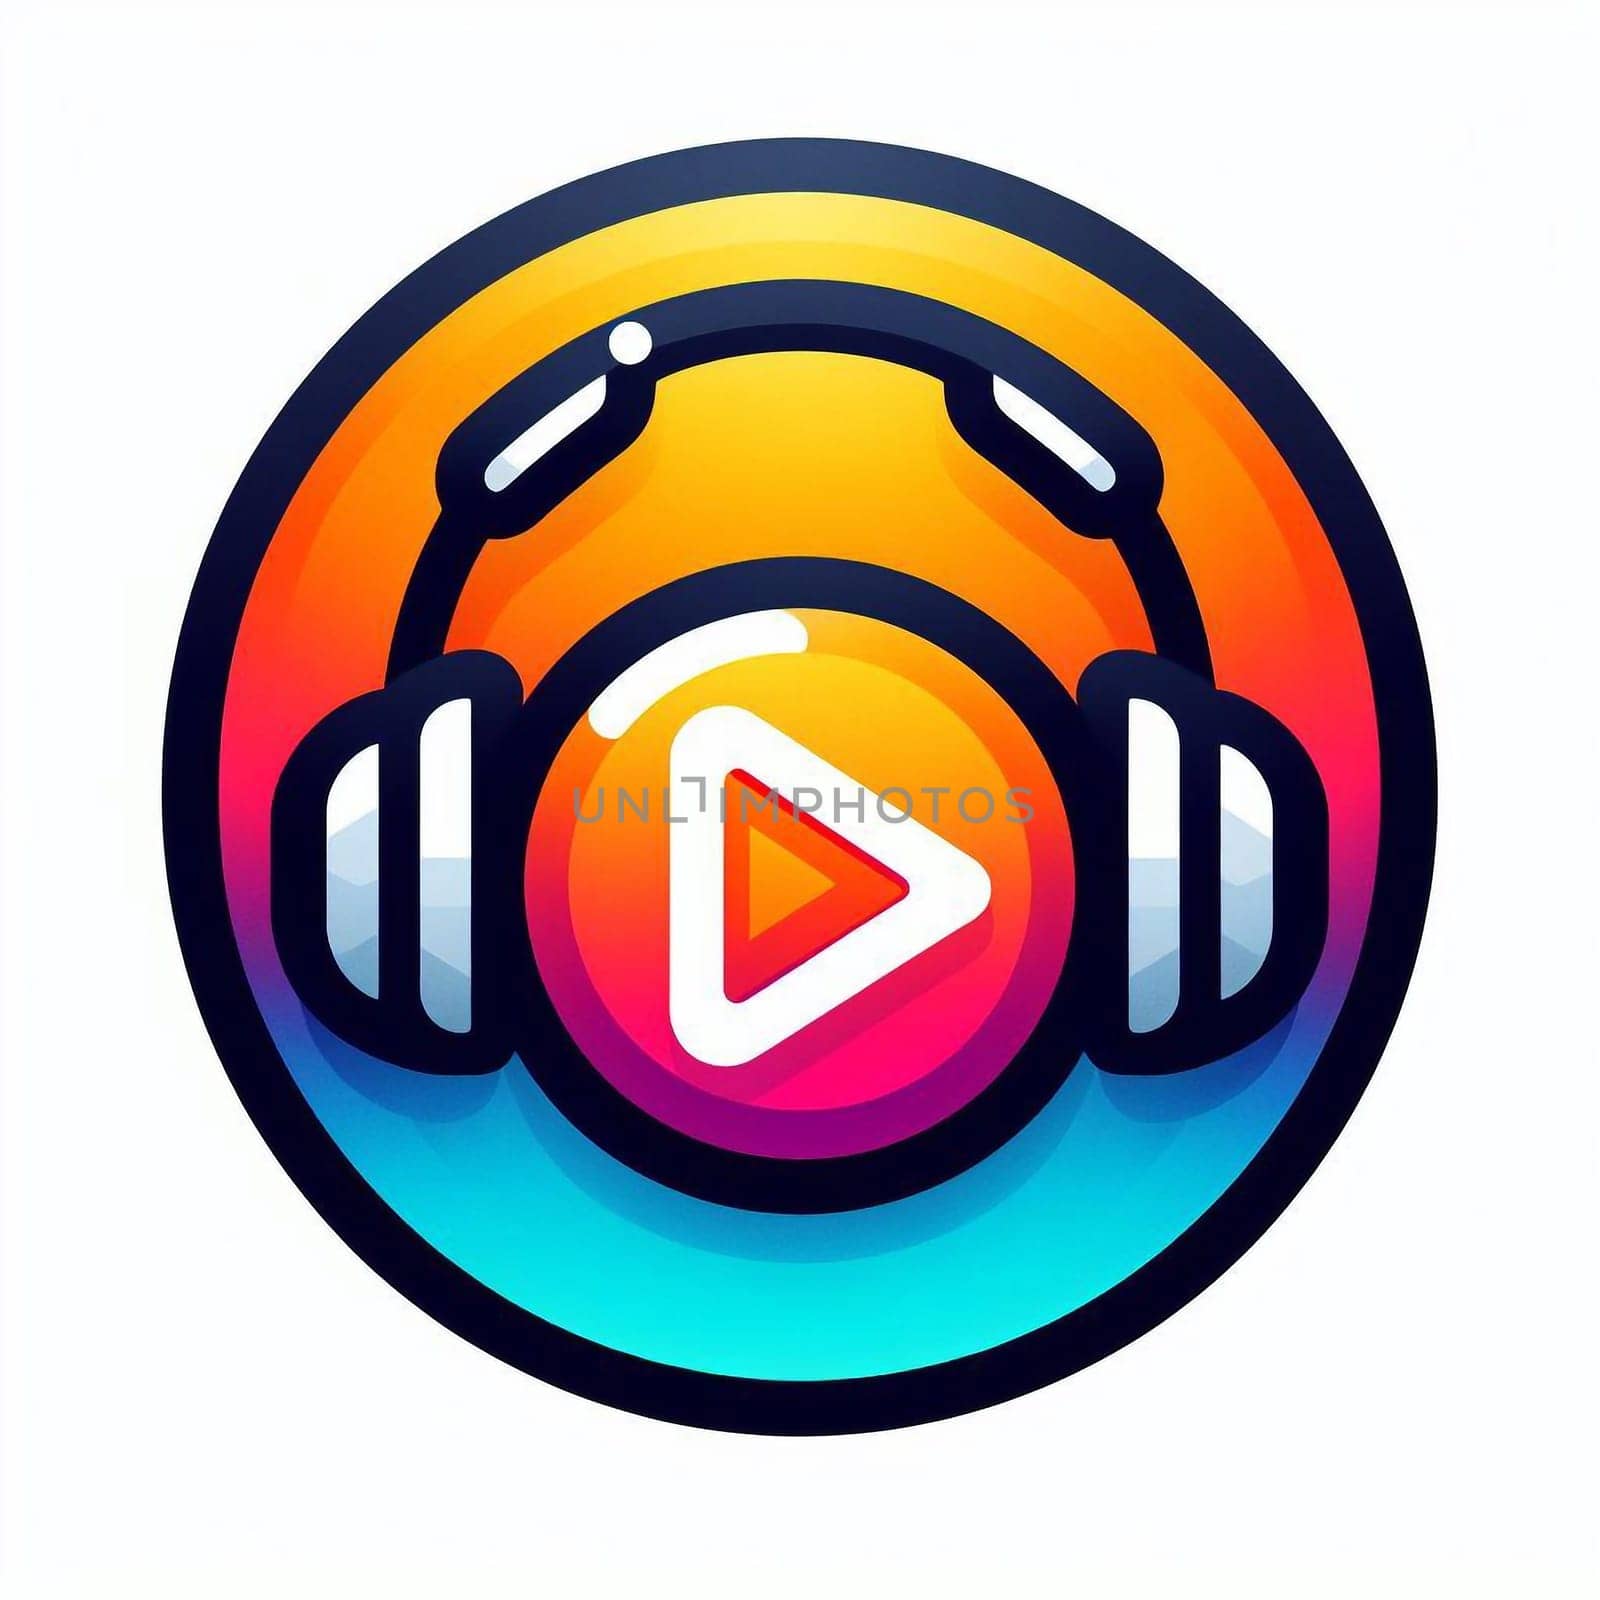 Listen to music and podcasts online the logo